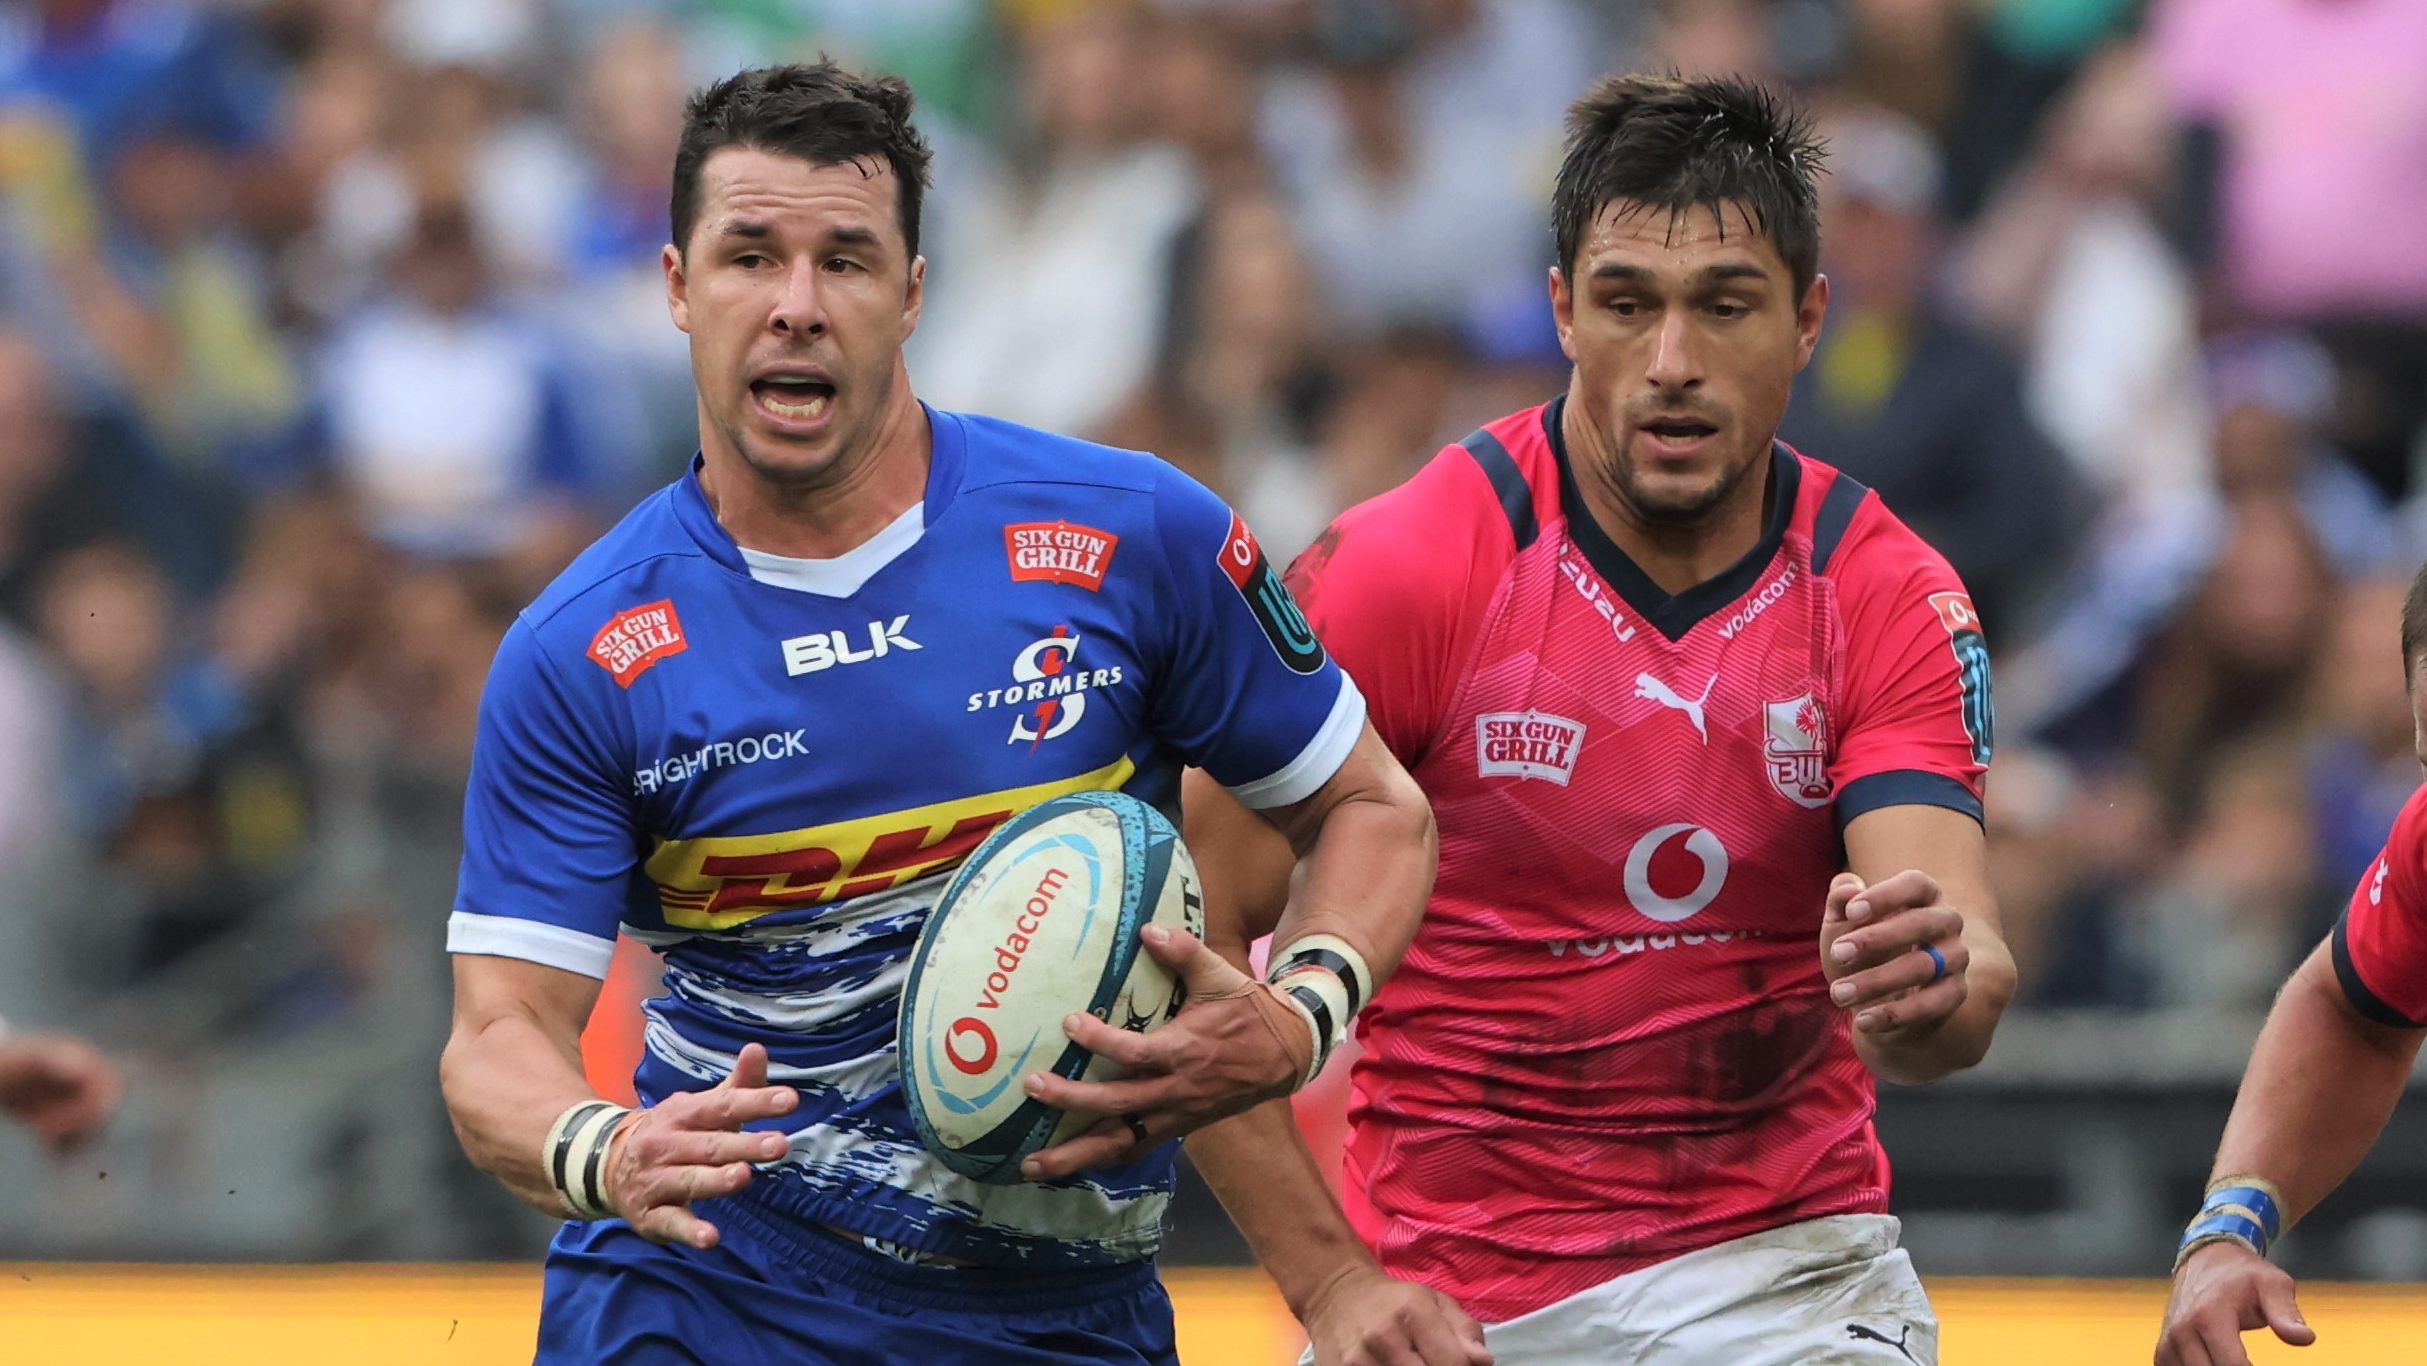 CAPE TOWN, SOUTH AFRICA - MAY 06: Ruhan Nel of Stormers during the United Rugby Championship quarter final match between DHL Stormers and Vodacom Bulls at DHL Stadium on May 06, 2023 in Cape Town, South Africa. (Photo by Carl Fourie/Gallo Images)